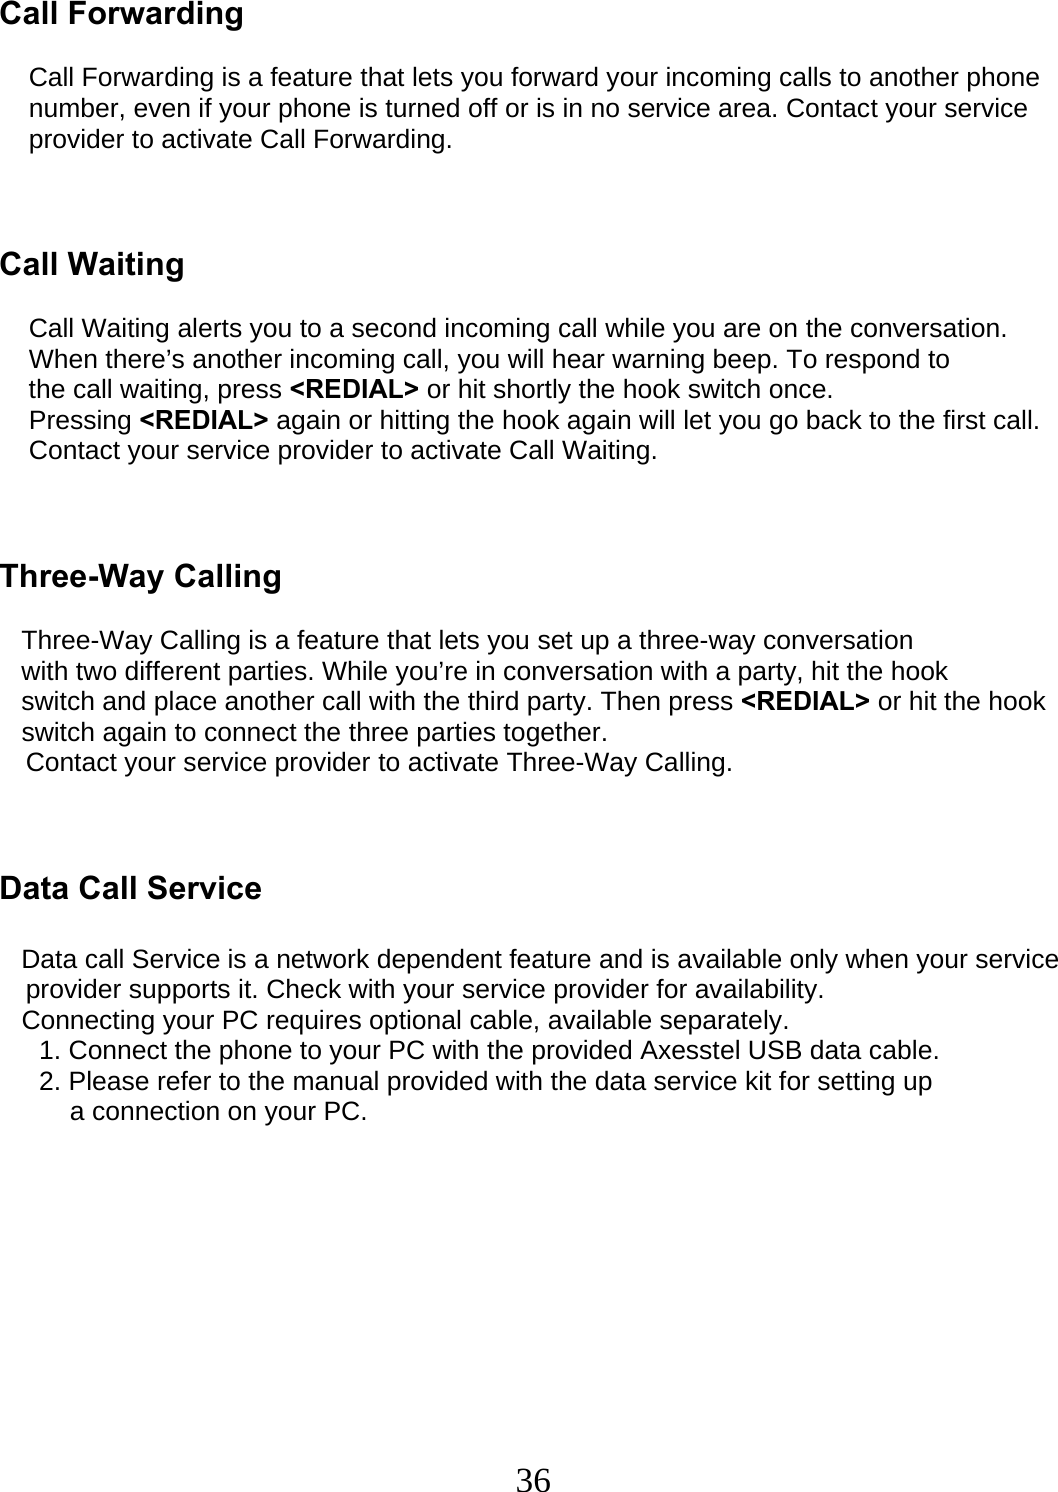  36  Call Forwarding            Call Forwarding is a feature that lets you forward your incoming calls to another phone     number, even if your phone is turned off or is in no service area. Contact your service     provider to activate Call Forwarding.    Call Waiting      Call Waiting alerts you to a second incoming call while you are on the conversation.     When there’s another incoming call, you will hear warning beep. To respond to     the call waiting, press &lt;REDIAL&gt; or hit shortly the hook switch once.     Pressing &lt;REDIAL&gt; again or hitting the hook again will let you go back to the first call.        Contact your service provider to activate Call Waiting.    Three-Way Calling     Three-Way Calling is a feature that lets you set up a three-way conversation    with two different parties. While you’re in conversation with a party, hit the hook    switch and place another call with the third party. Then press &lt;REDIAL&gt; or hit the hook    switch again to connect the three parties together.  Contact your service provider to activate Three-Way Calling.    Data Call Service     Data call Service is a network dependent feature and is available only when your service   provider supports it. Check with your service provider for availability.    Connecting your PC requires optional cable, available separately.    1. Connect the phone to your PC with the provided Axesstel USB data cable.    2. Please refer to the manual provided with the data service kit for setting up  a connection on your PC.